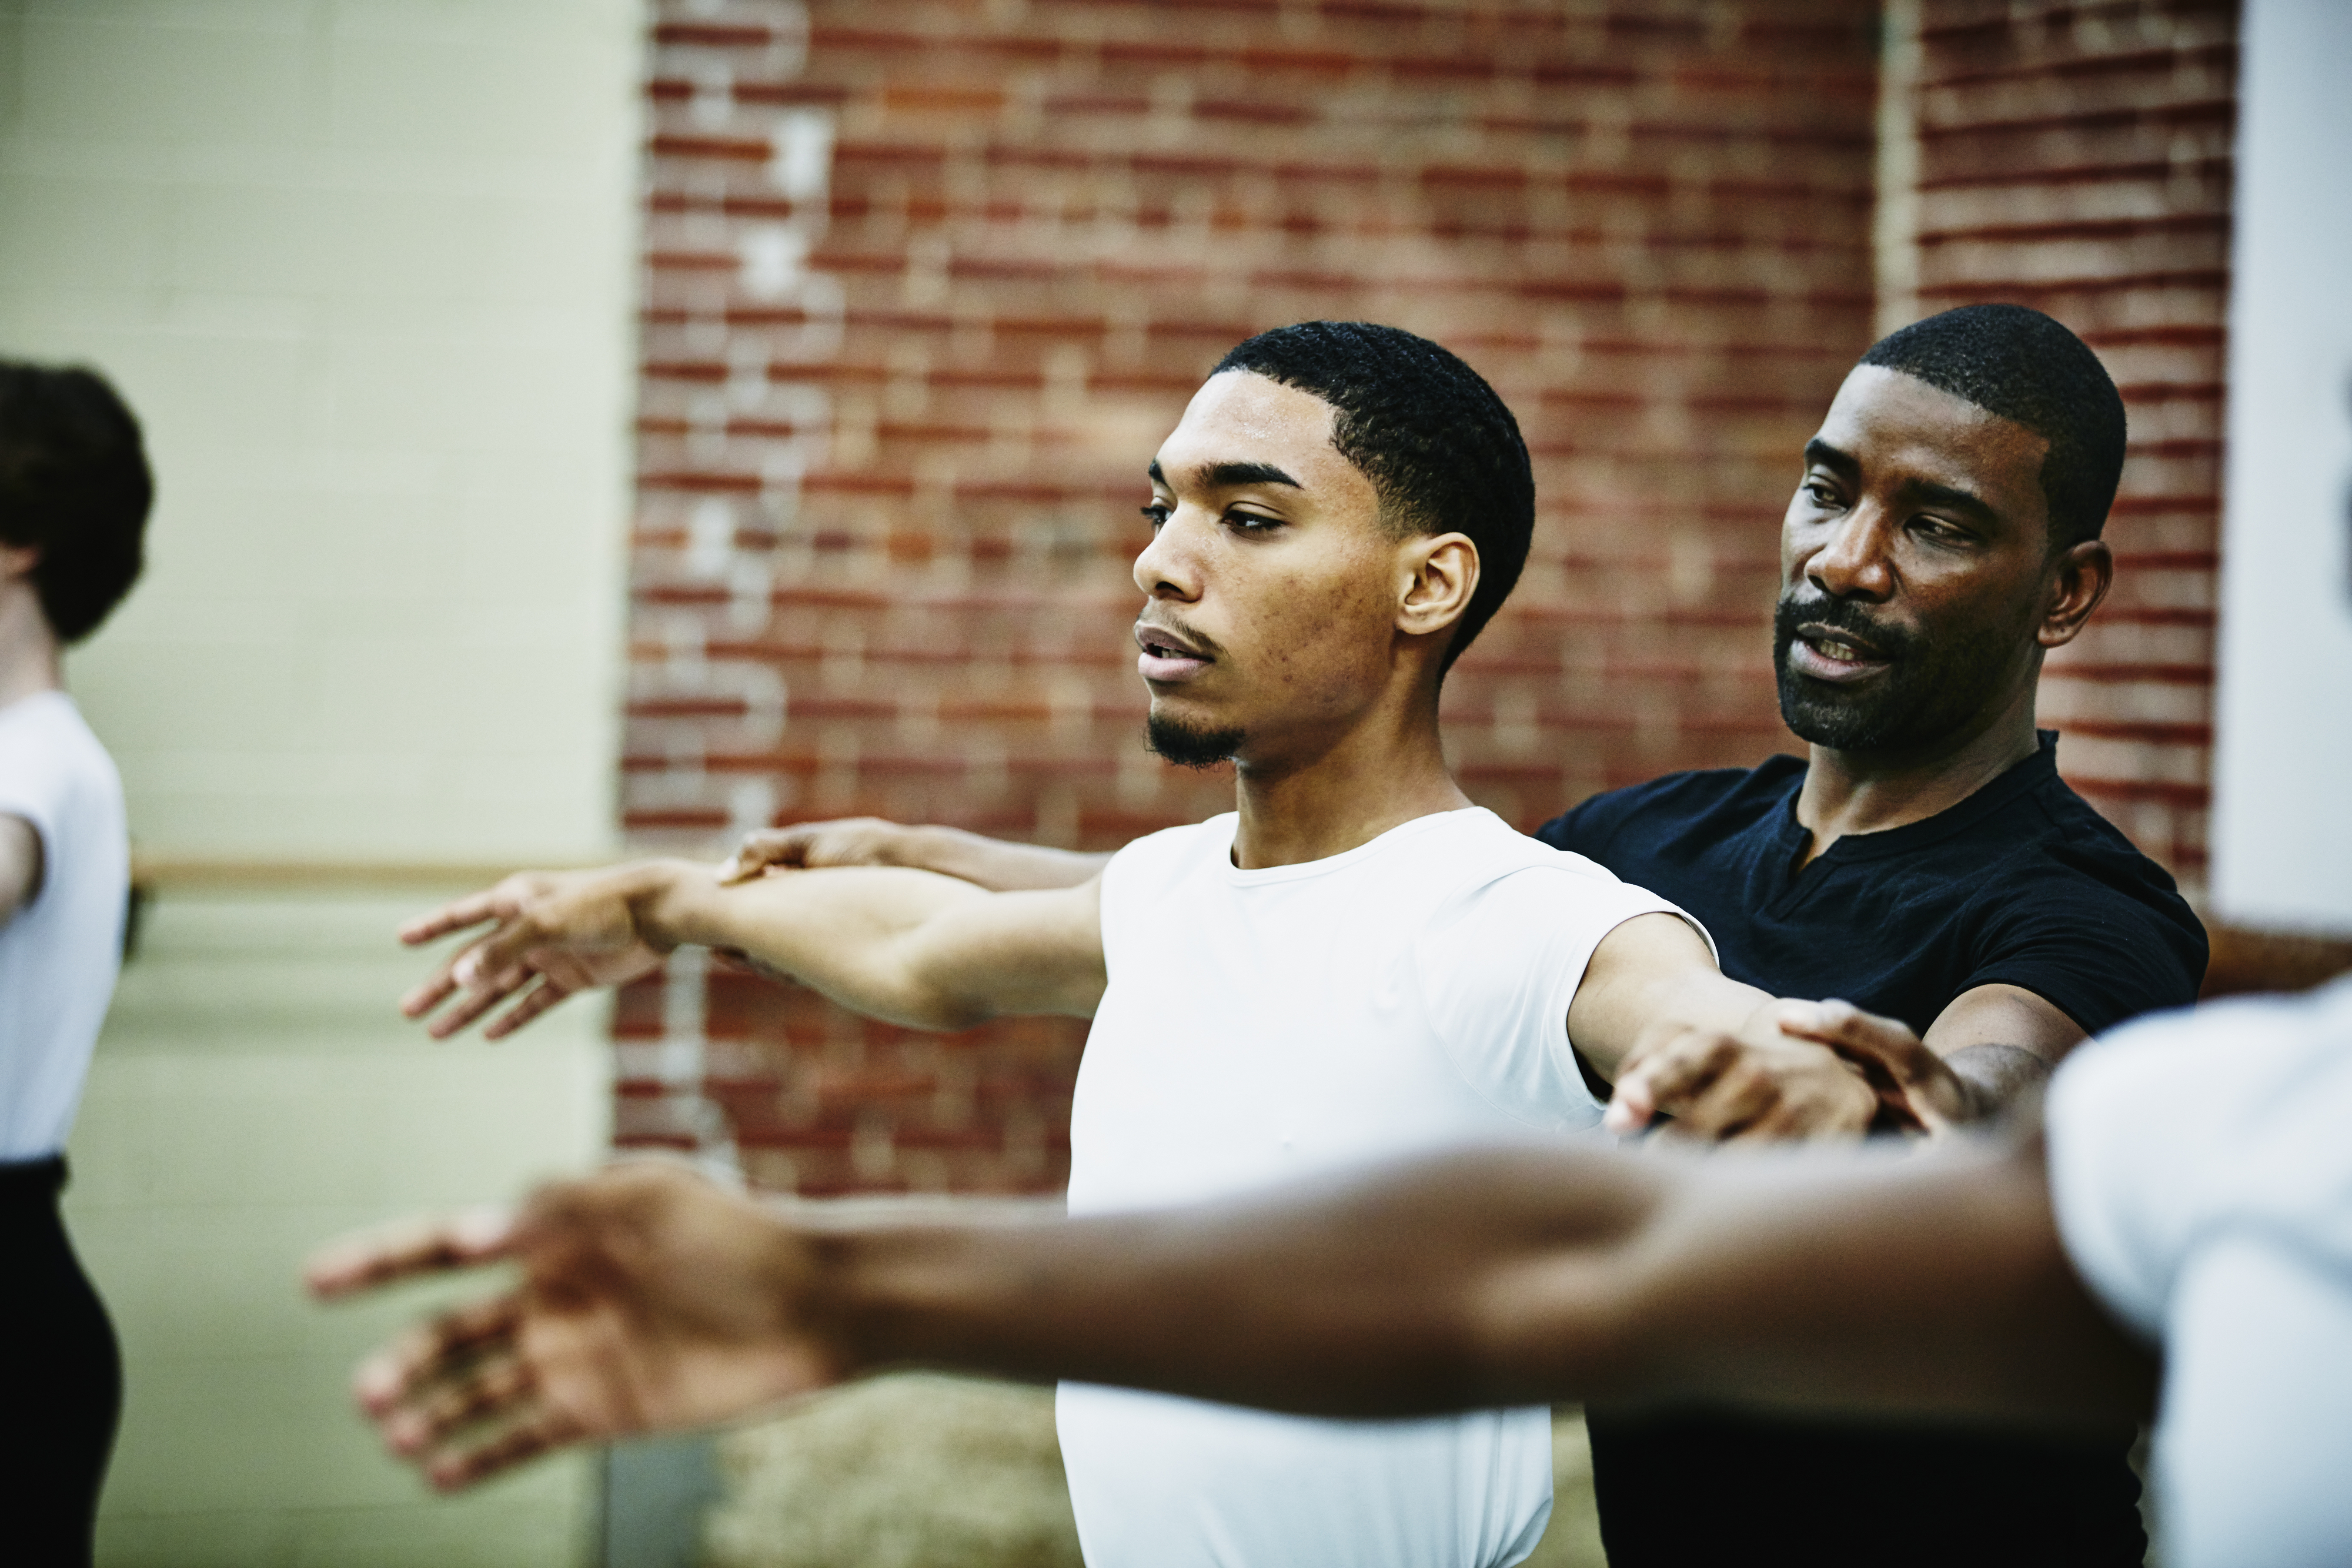 Two men practicing ballet with one man instructing the other, both focused and arms extended